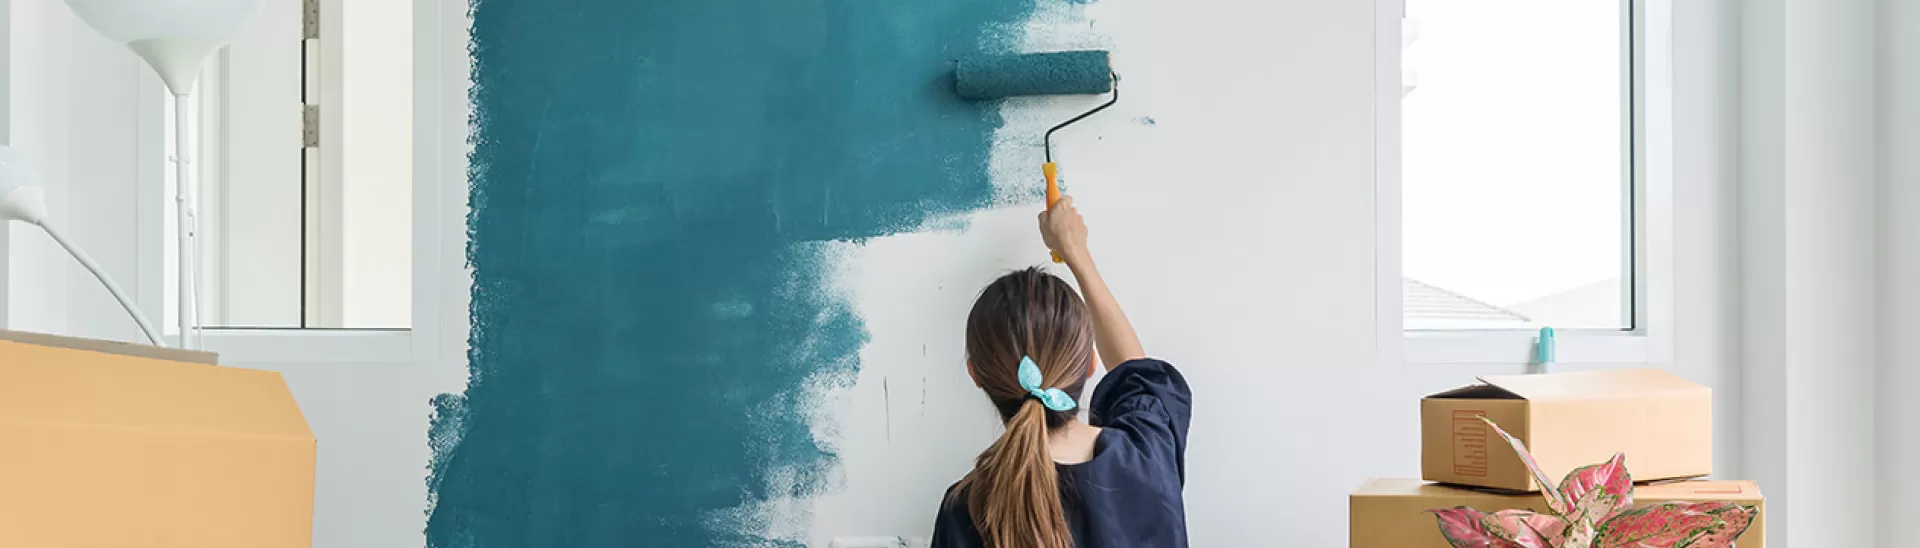 How To Paint A Room - Learn Steps to Paint a Room Like a Pro